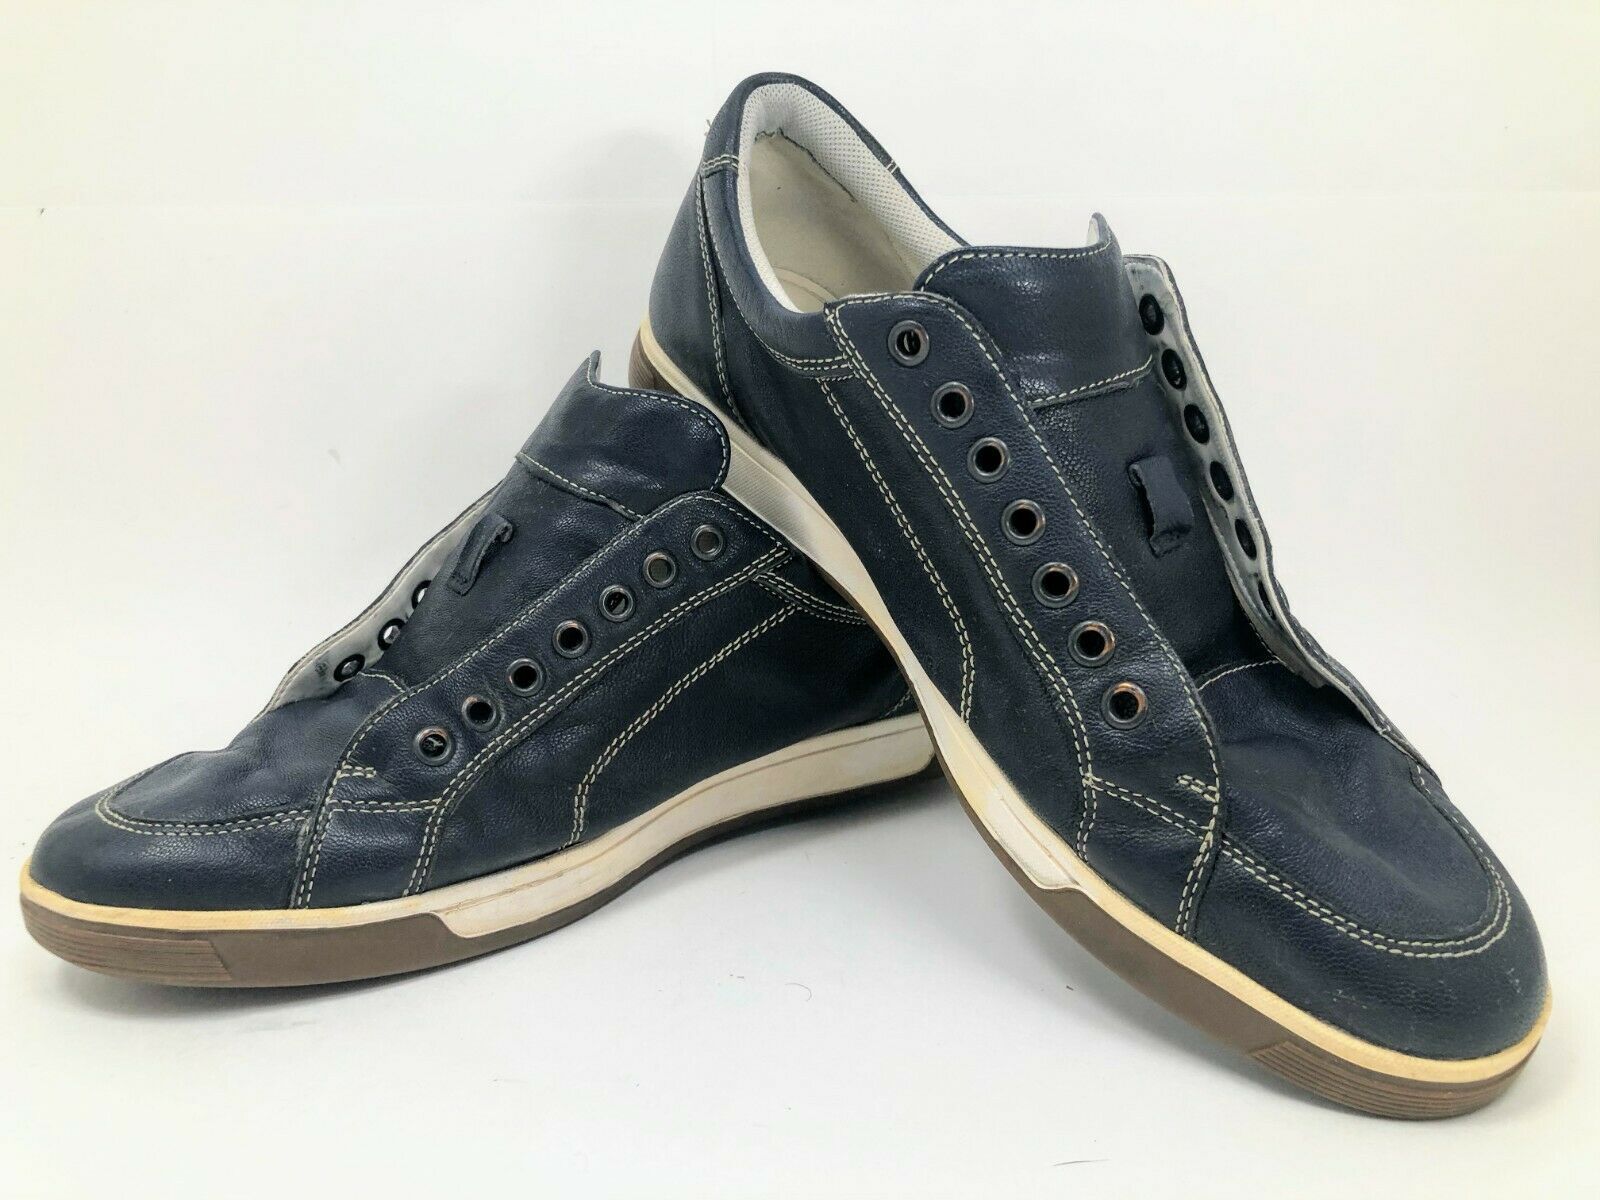 Cole Haan Nike Air QUINCY SPORT Navy LEATHER CASUAL OXFORDS Shoe Sz 10. ...